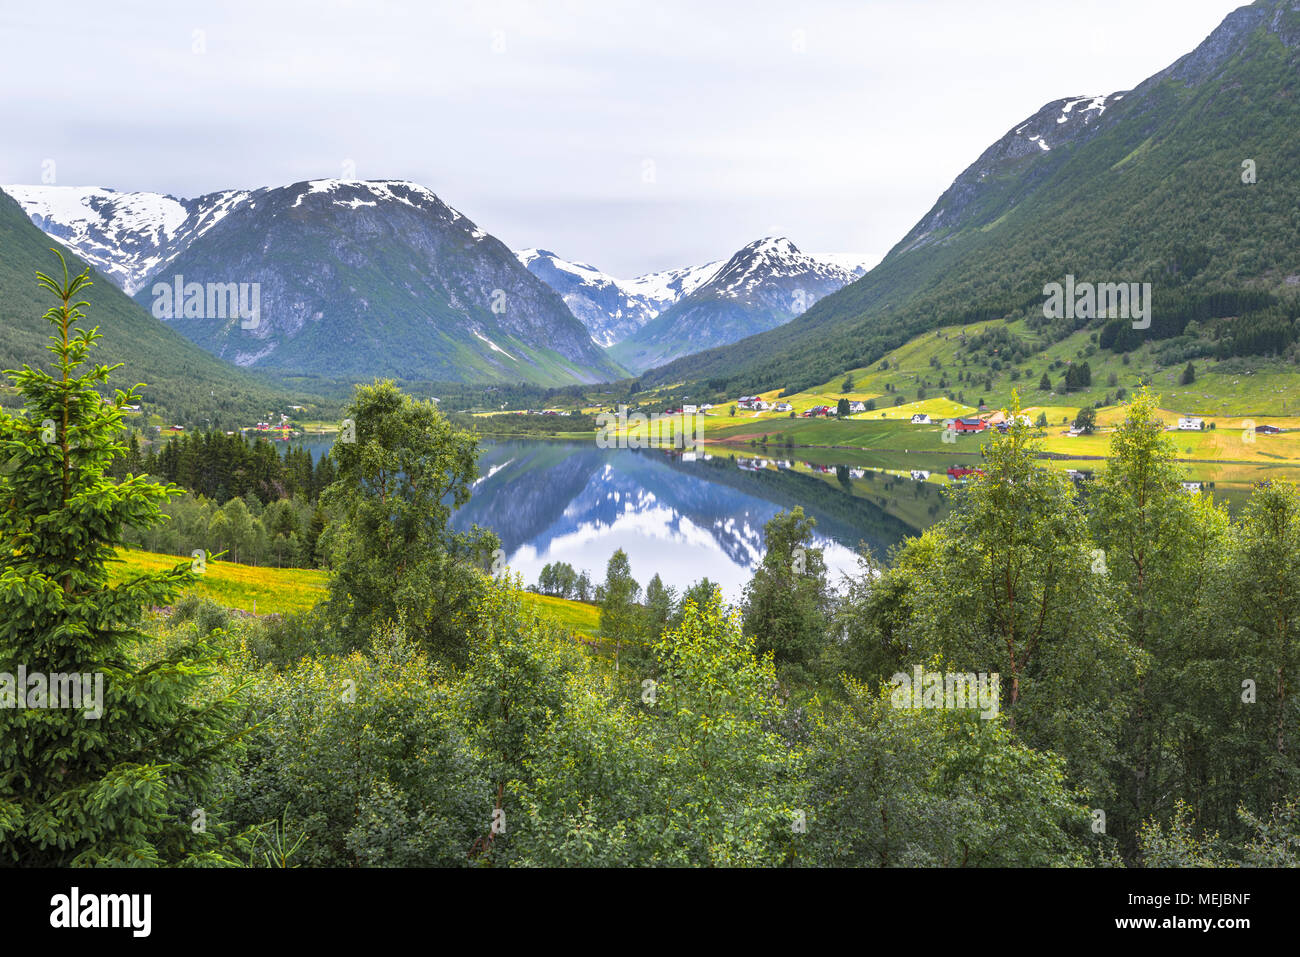 mountain panorama at the lake Dalavatnet, Norway, landscape with snow-capped mountains and mirroring, municipality of Sogndal, Sogn og Fjordane county Stock Photo